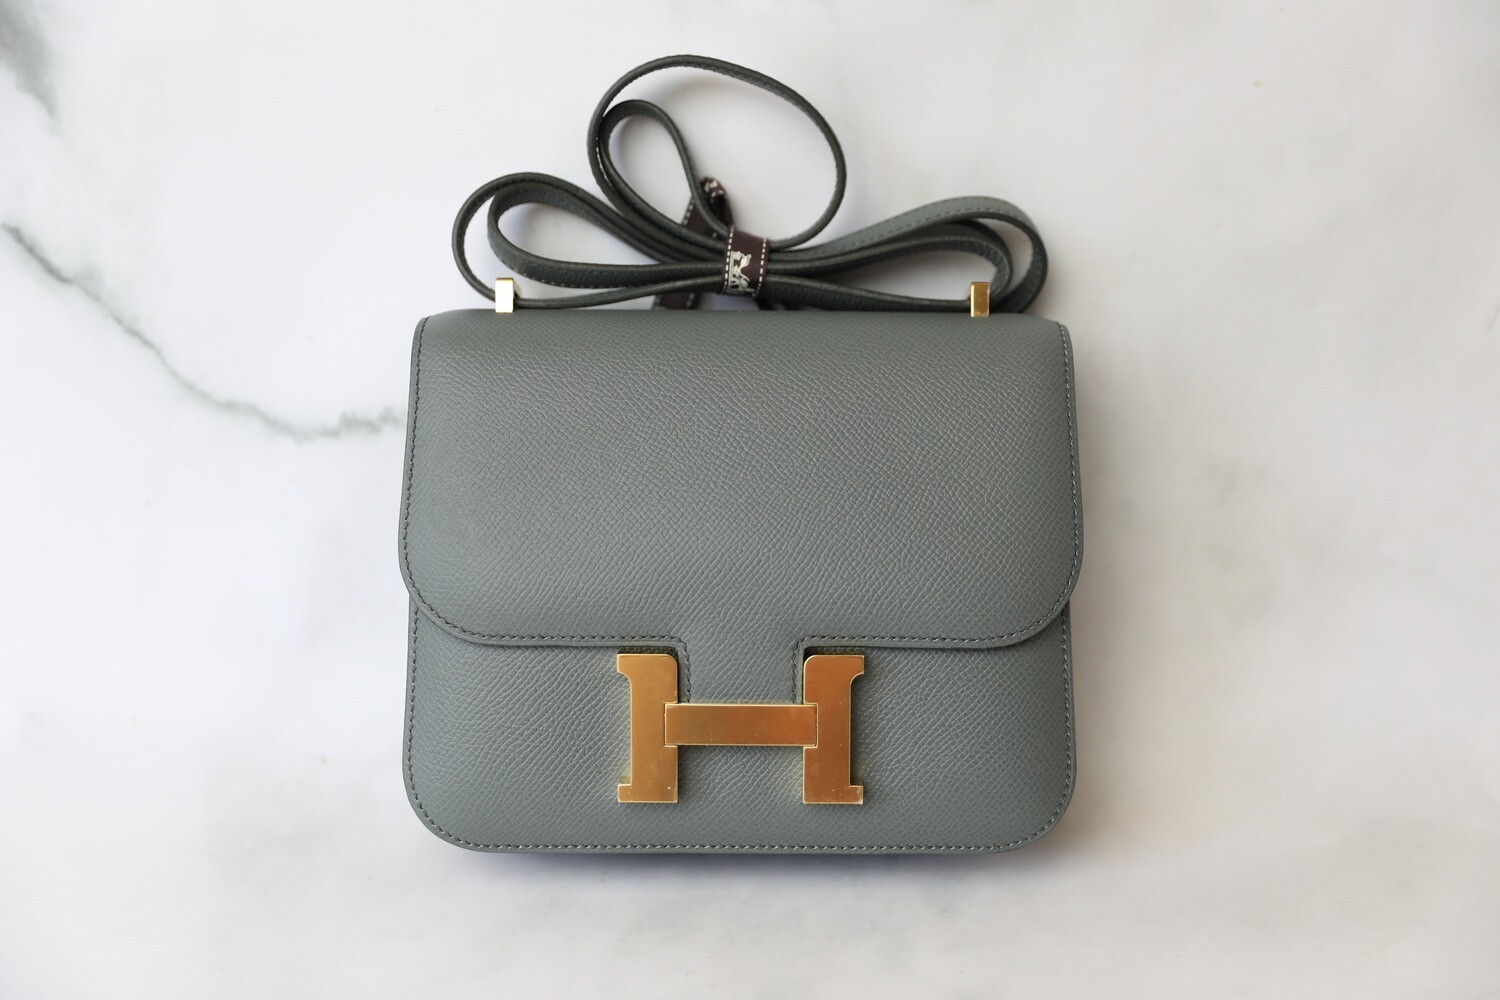 A VERT AMANDE EPSOM LEATHER MINI CONSTANCE 18 WITH GOLD HARDWARE